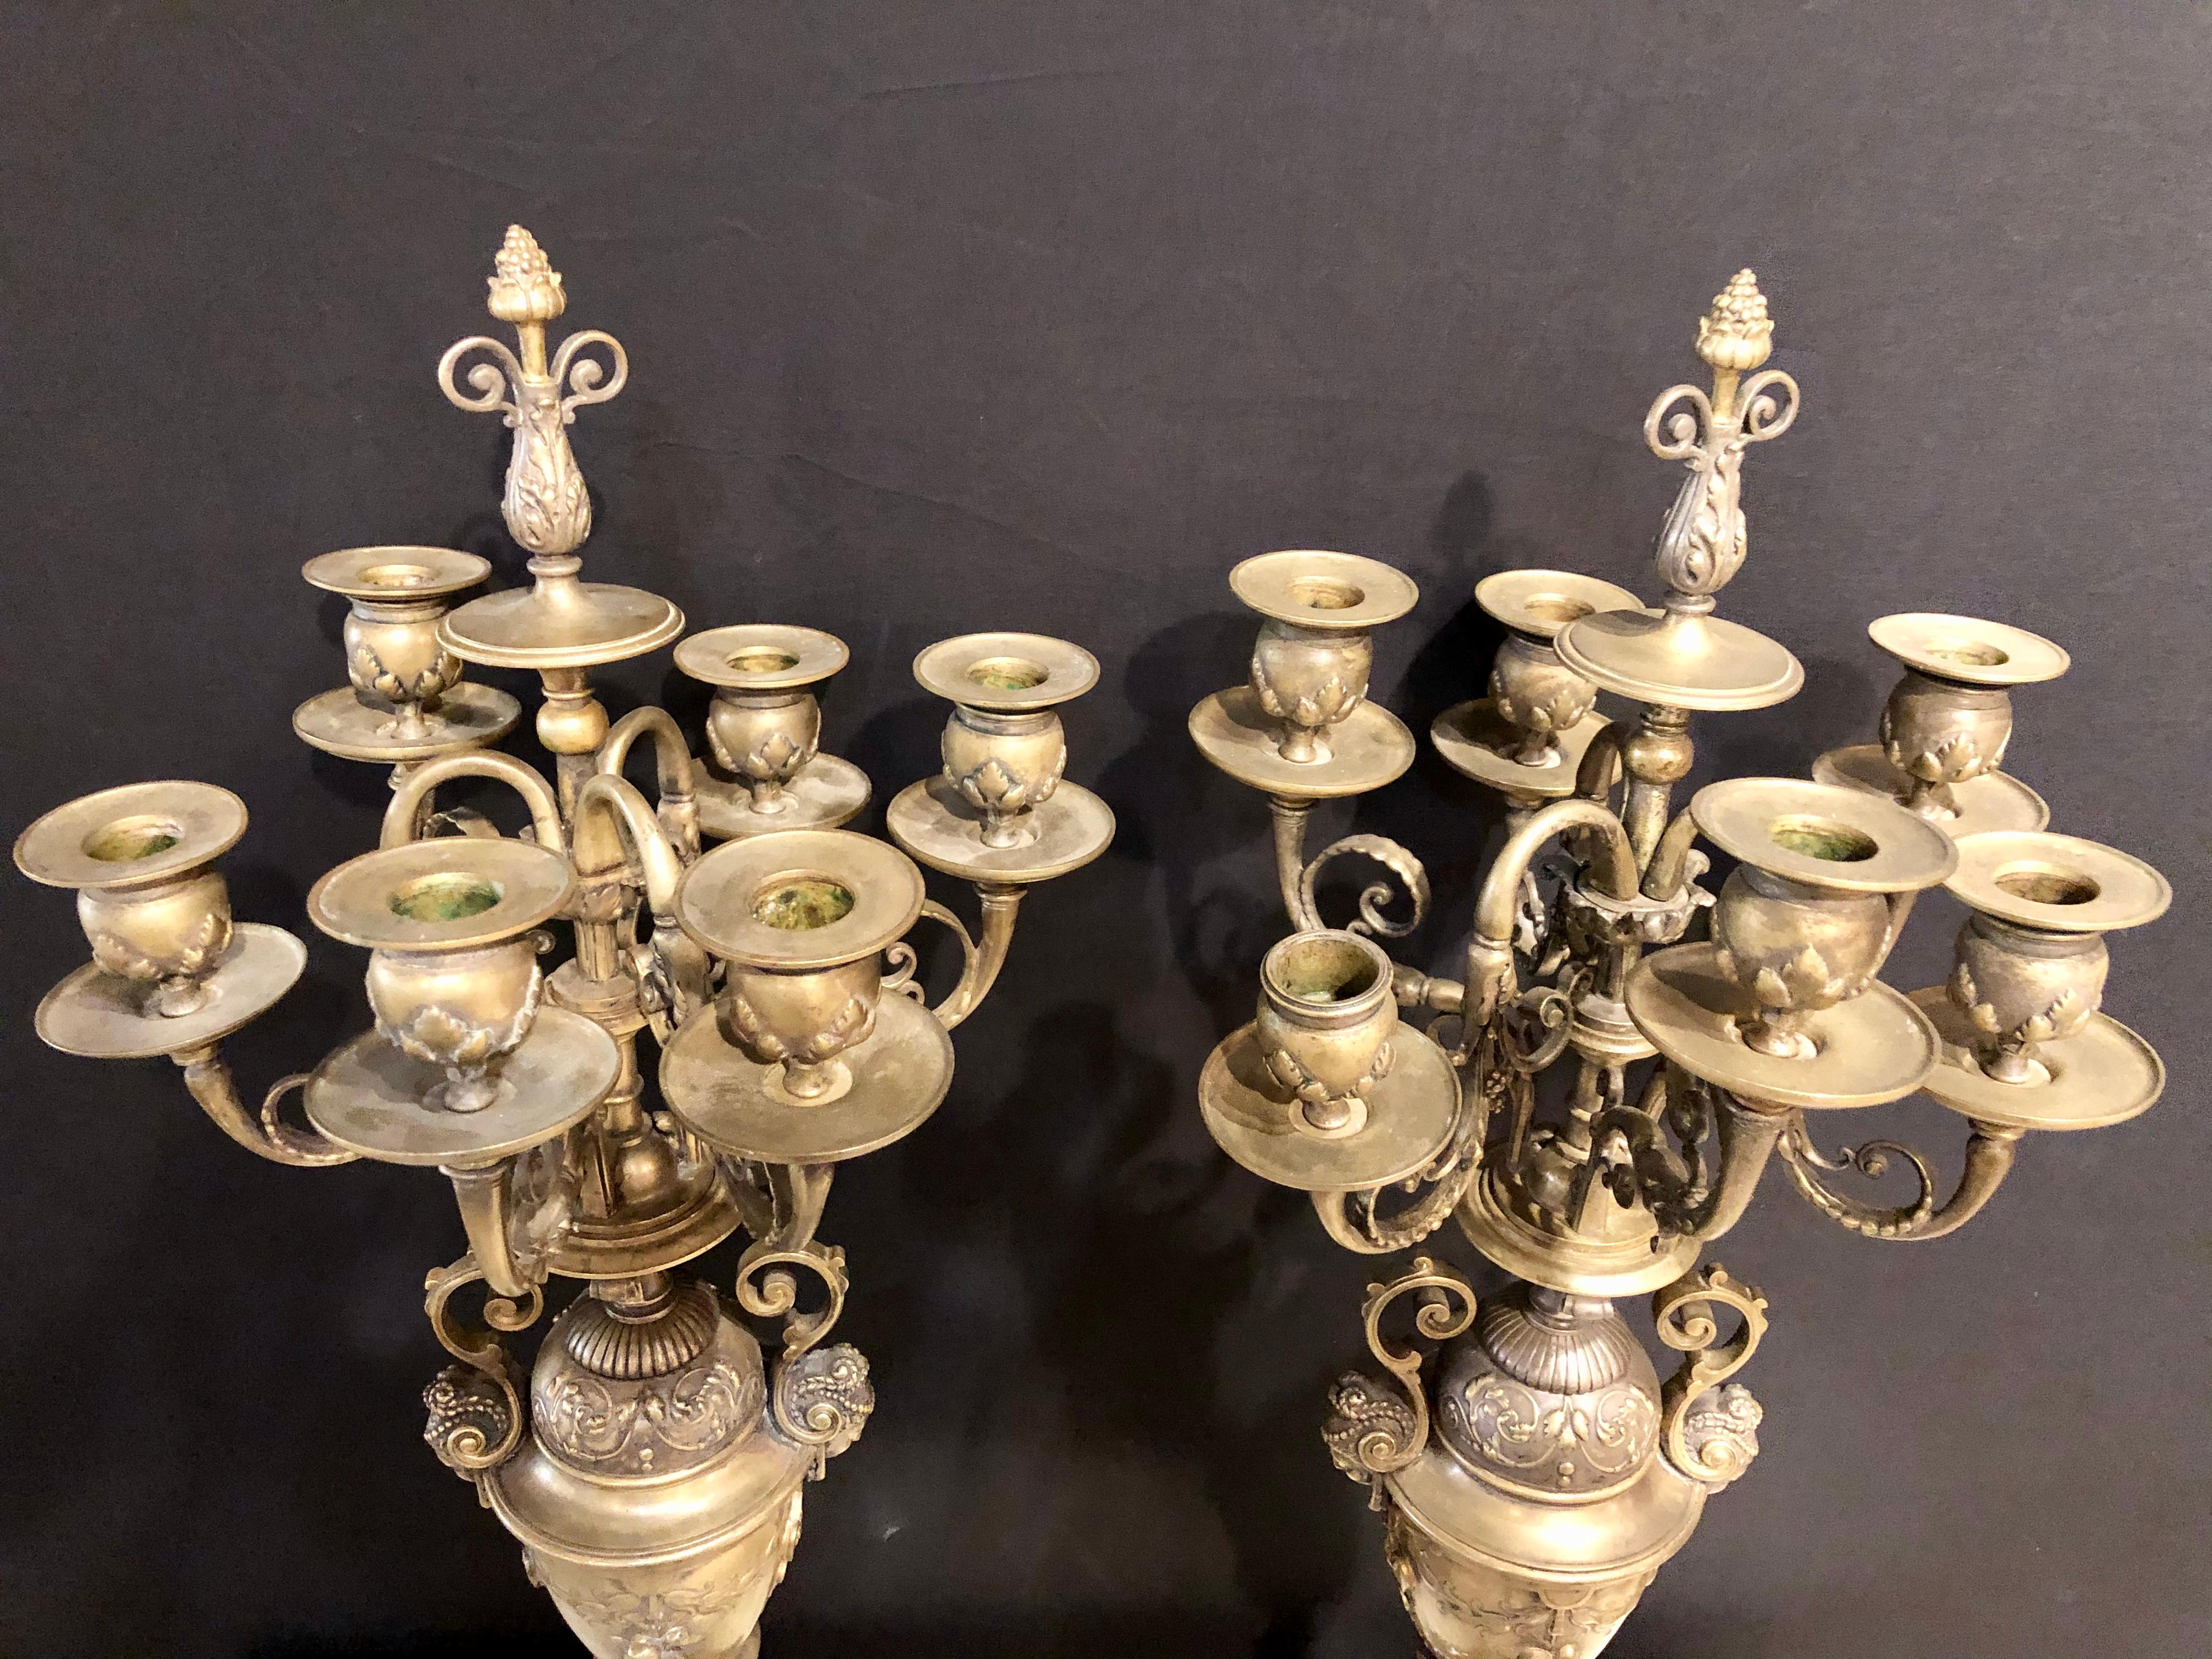 Bronze Pair of Brass Six-Arm Candelabras Bearing Figurative Faces and Fruits